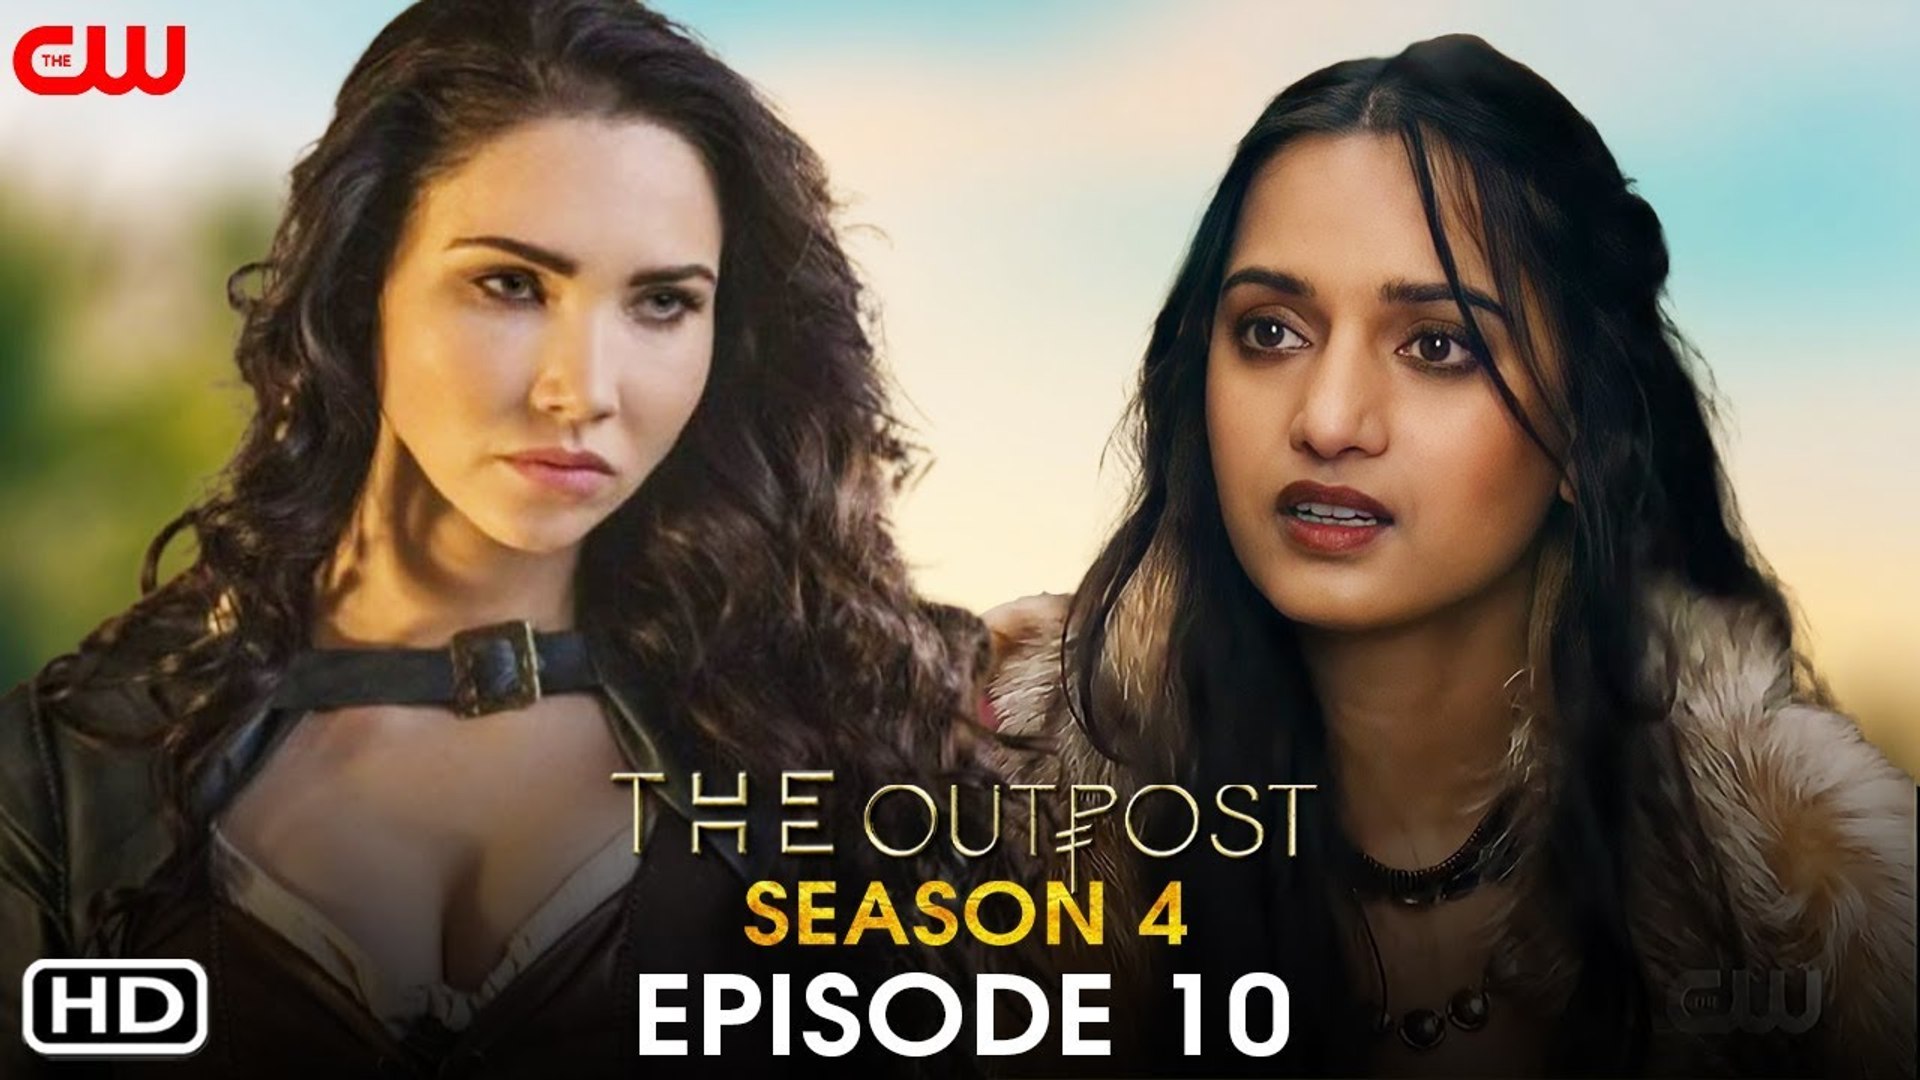 The Outpost Season 4 Episode 10 Promo (2021) The CW, Release Date, Cast,  Plot, 04x10 Promo,Preview - video Dailymotion